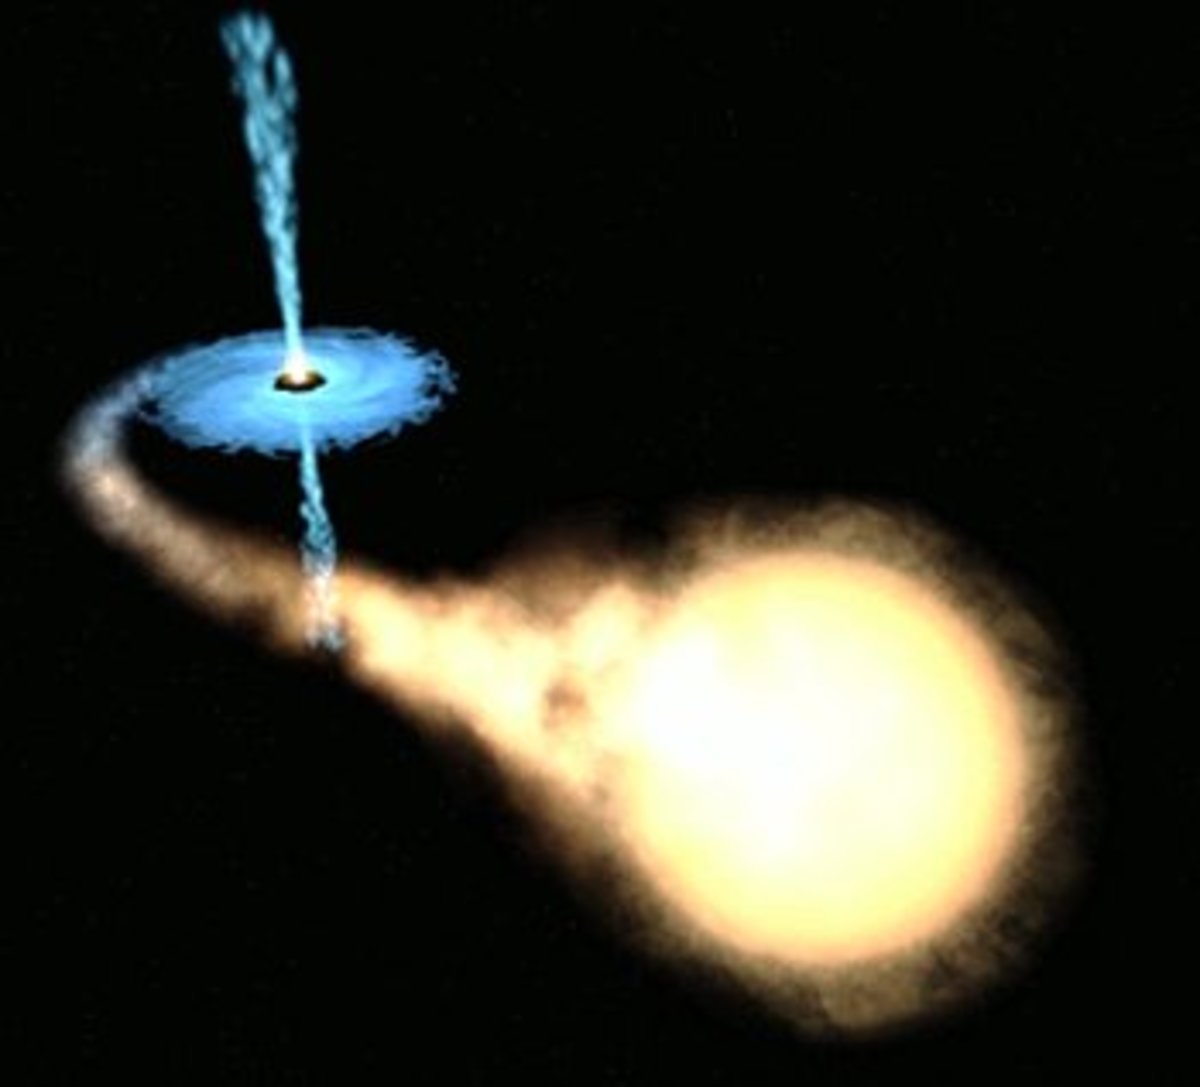 One way we can detect black holes is by observing one near a star.